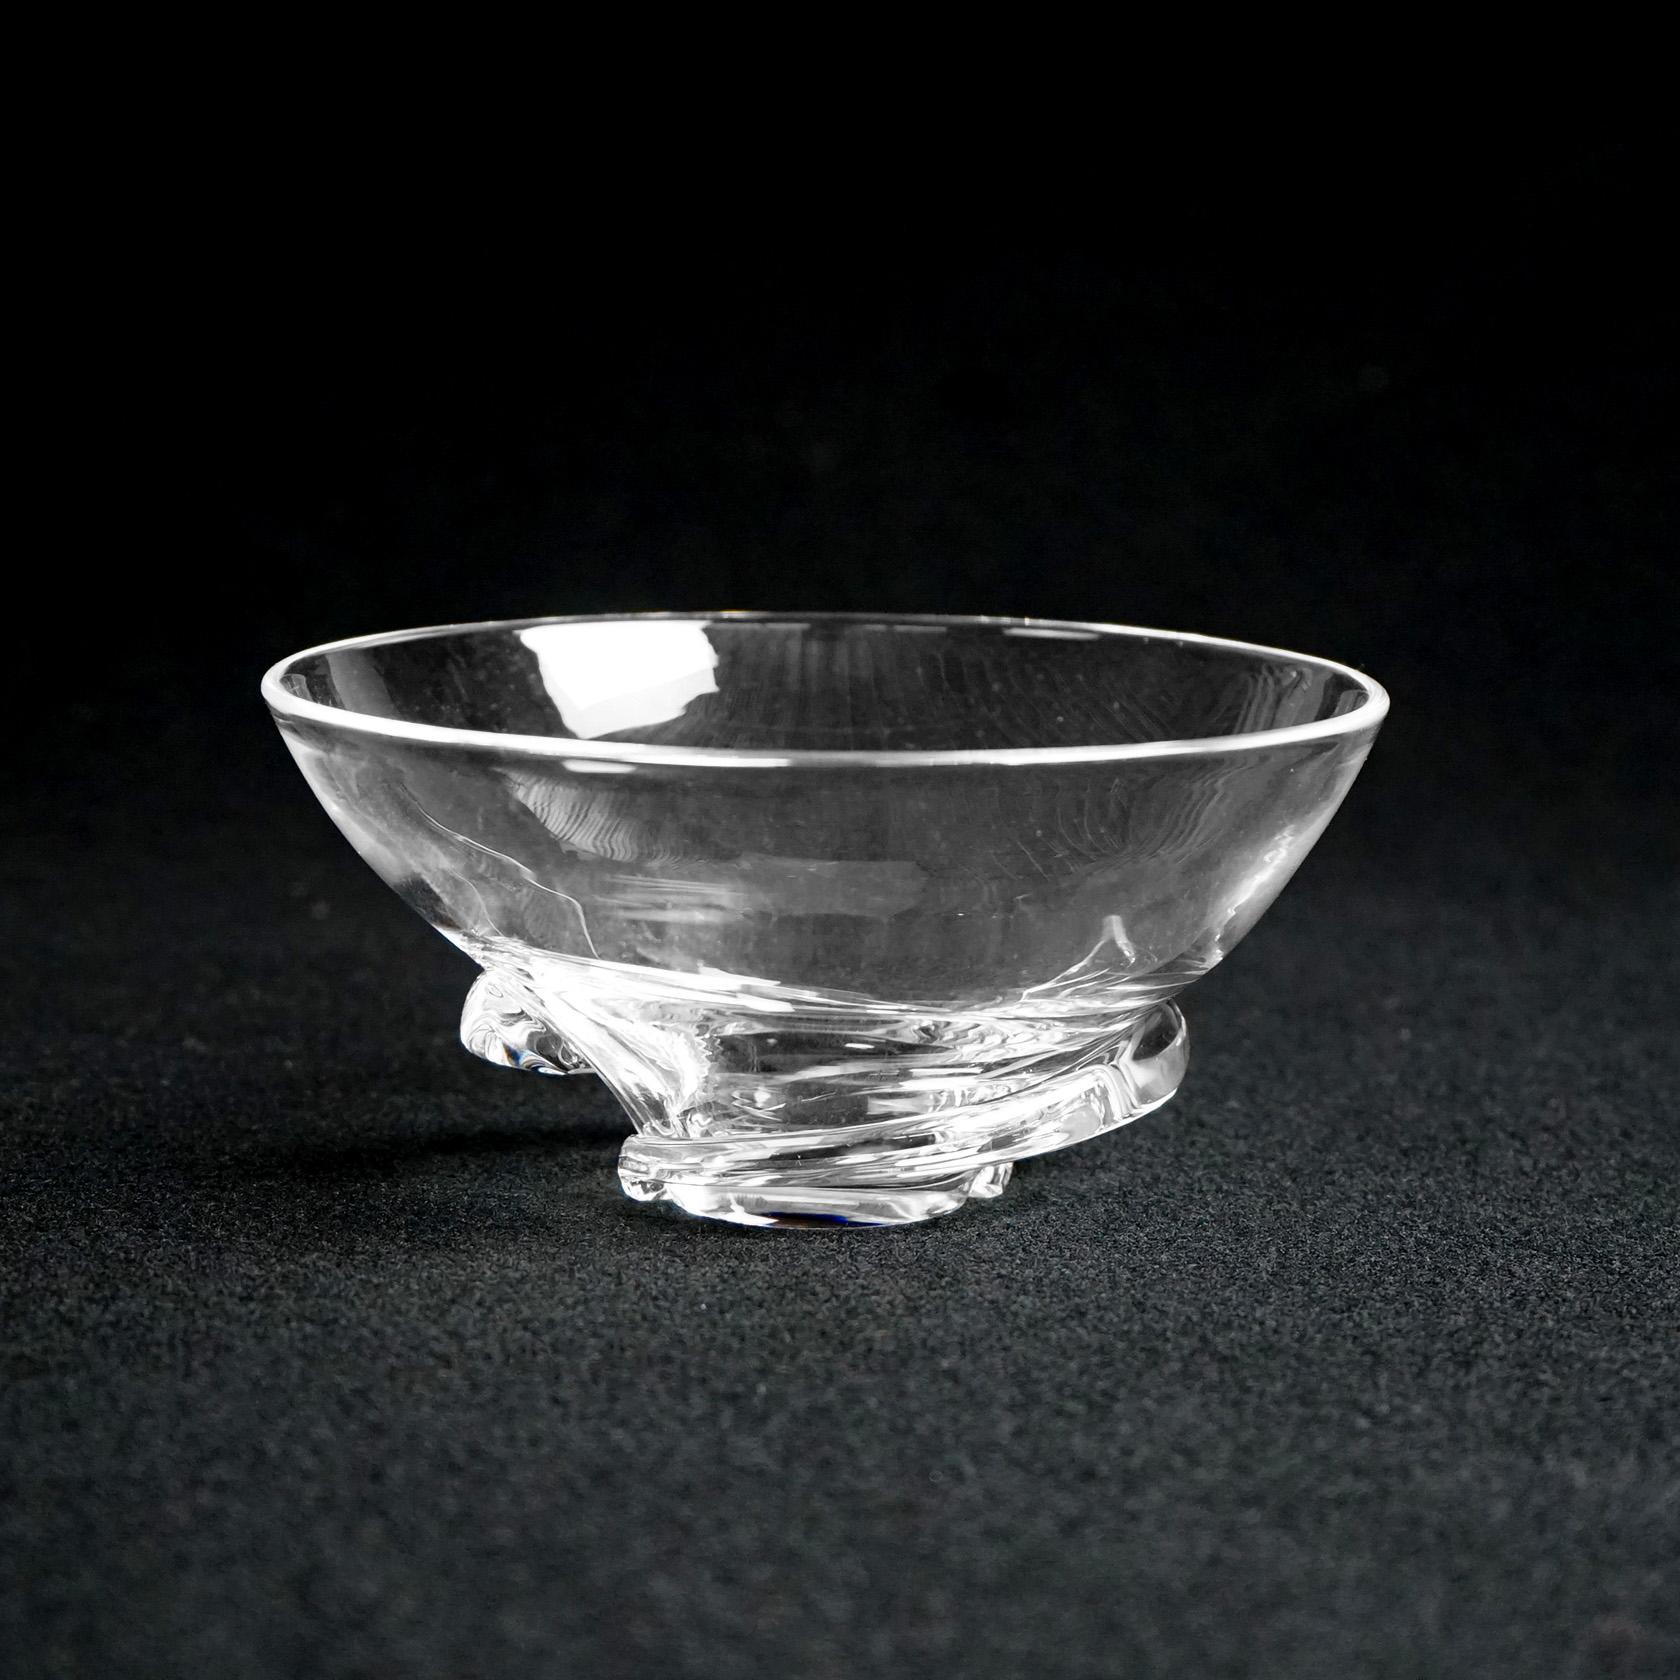 Mid Century Modern Steuben Art Glass Swirl Footed Crystal Bowl, Signed,  20thC

Measures - 7